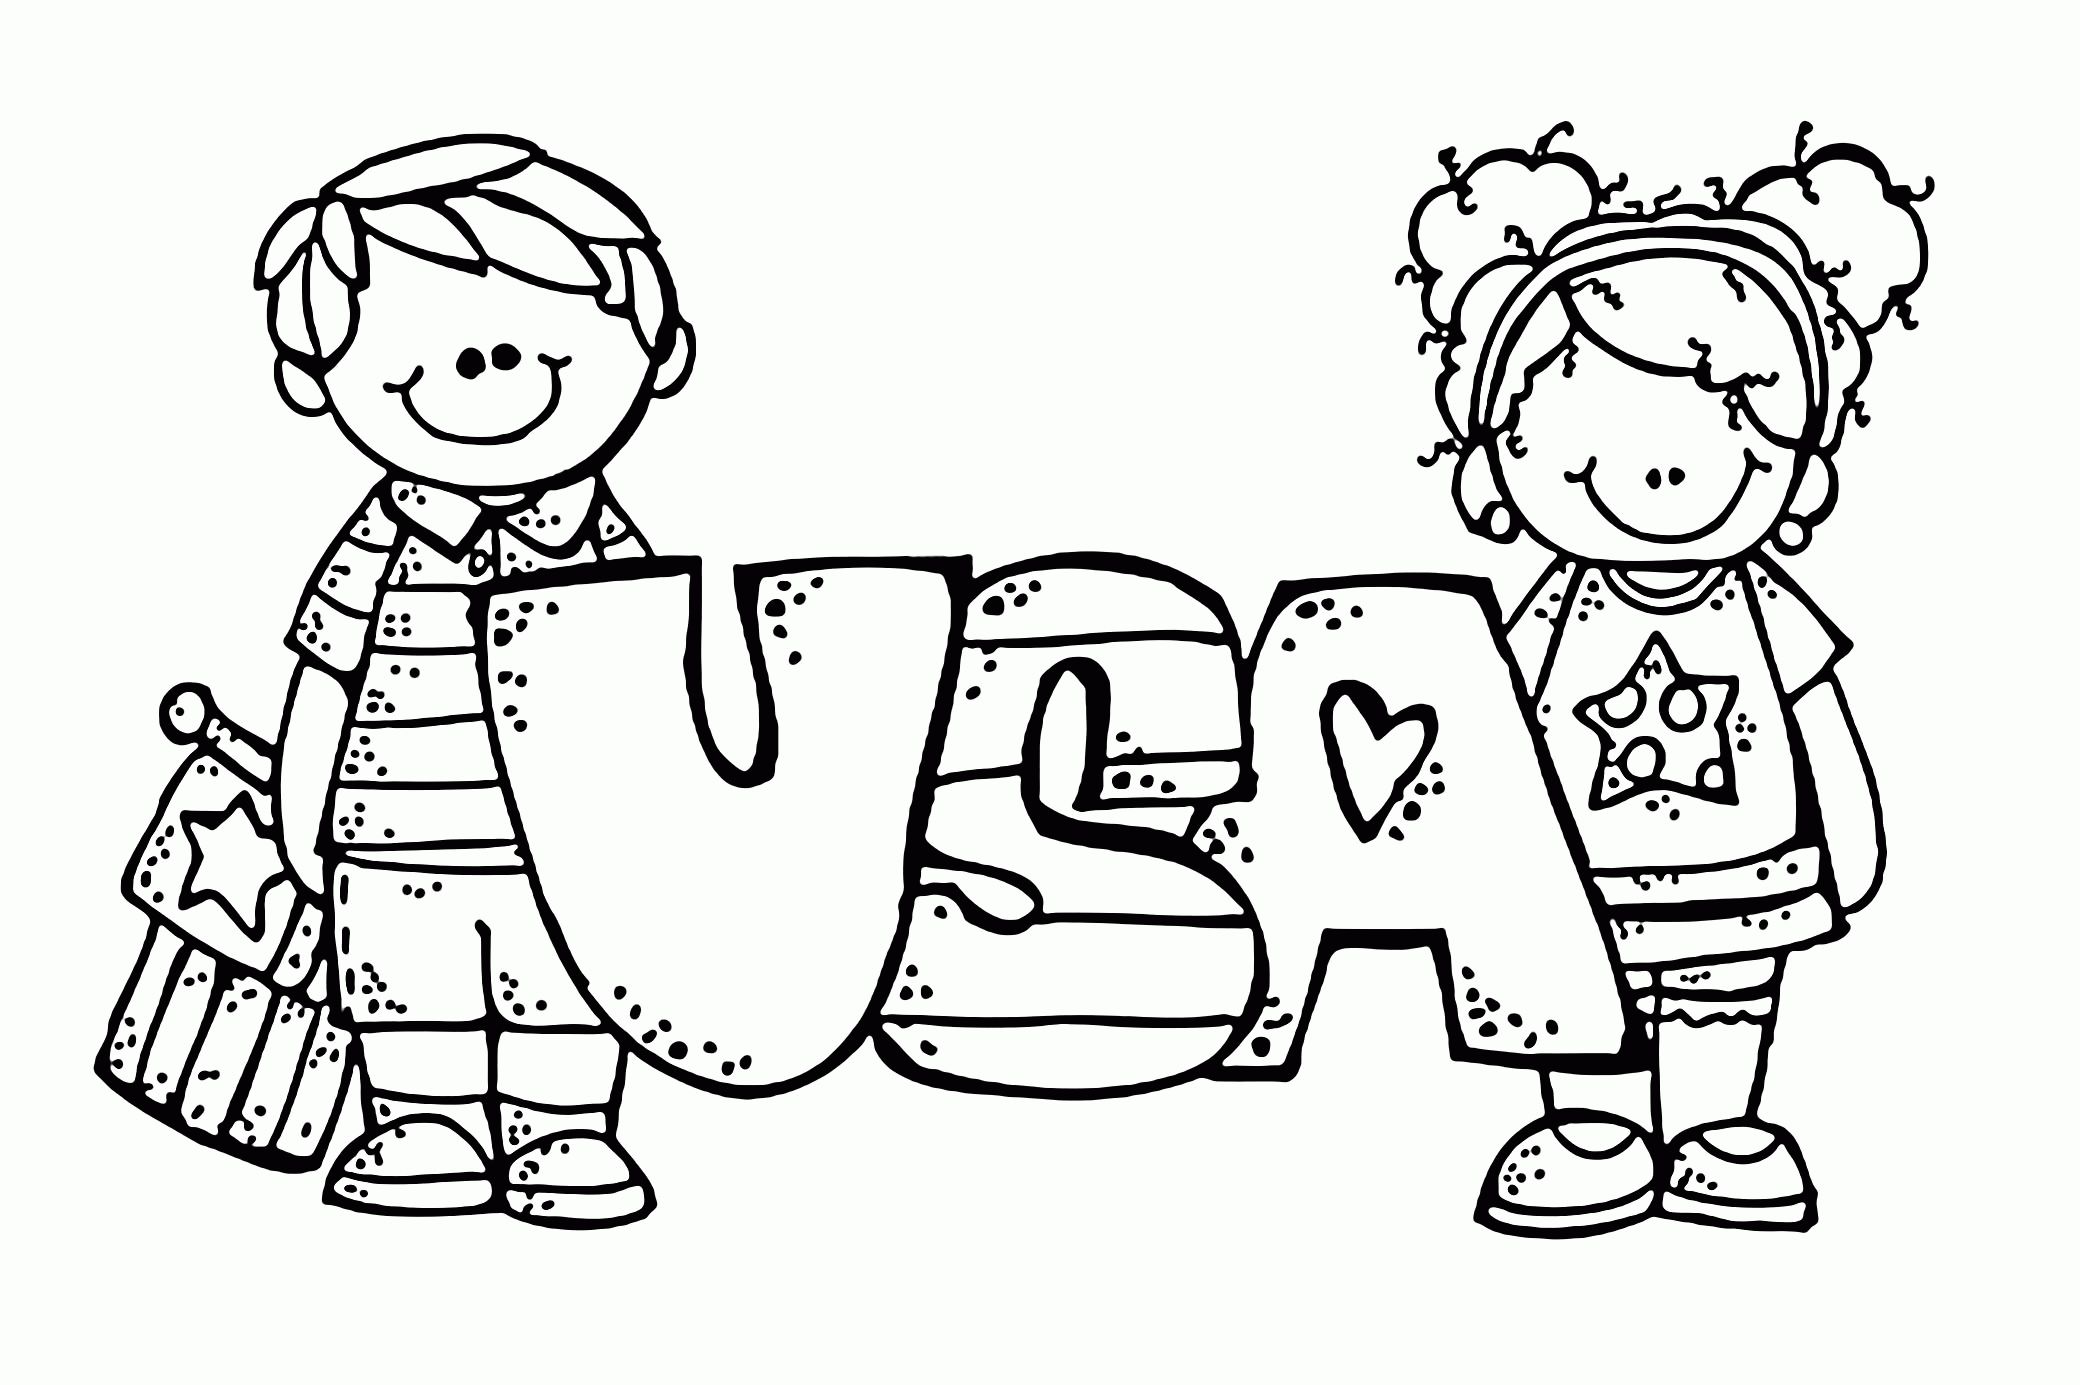 independence-day-coloring-pages-for-kids